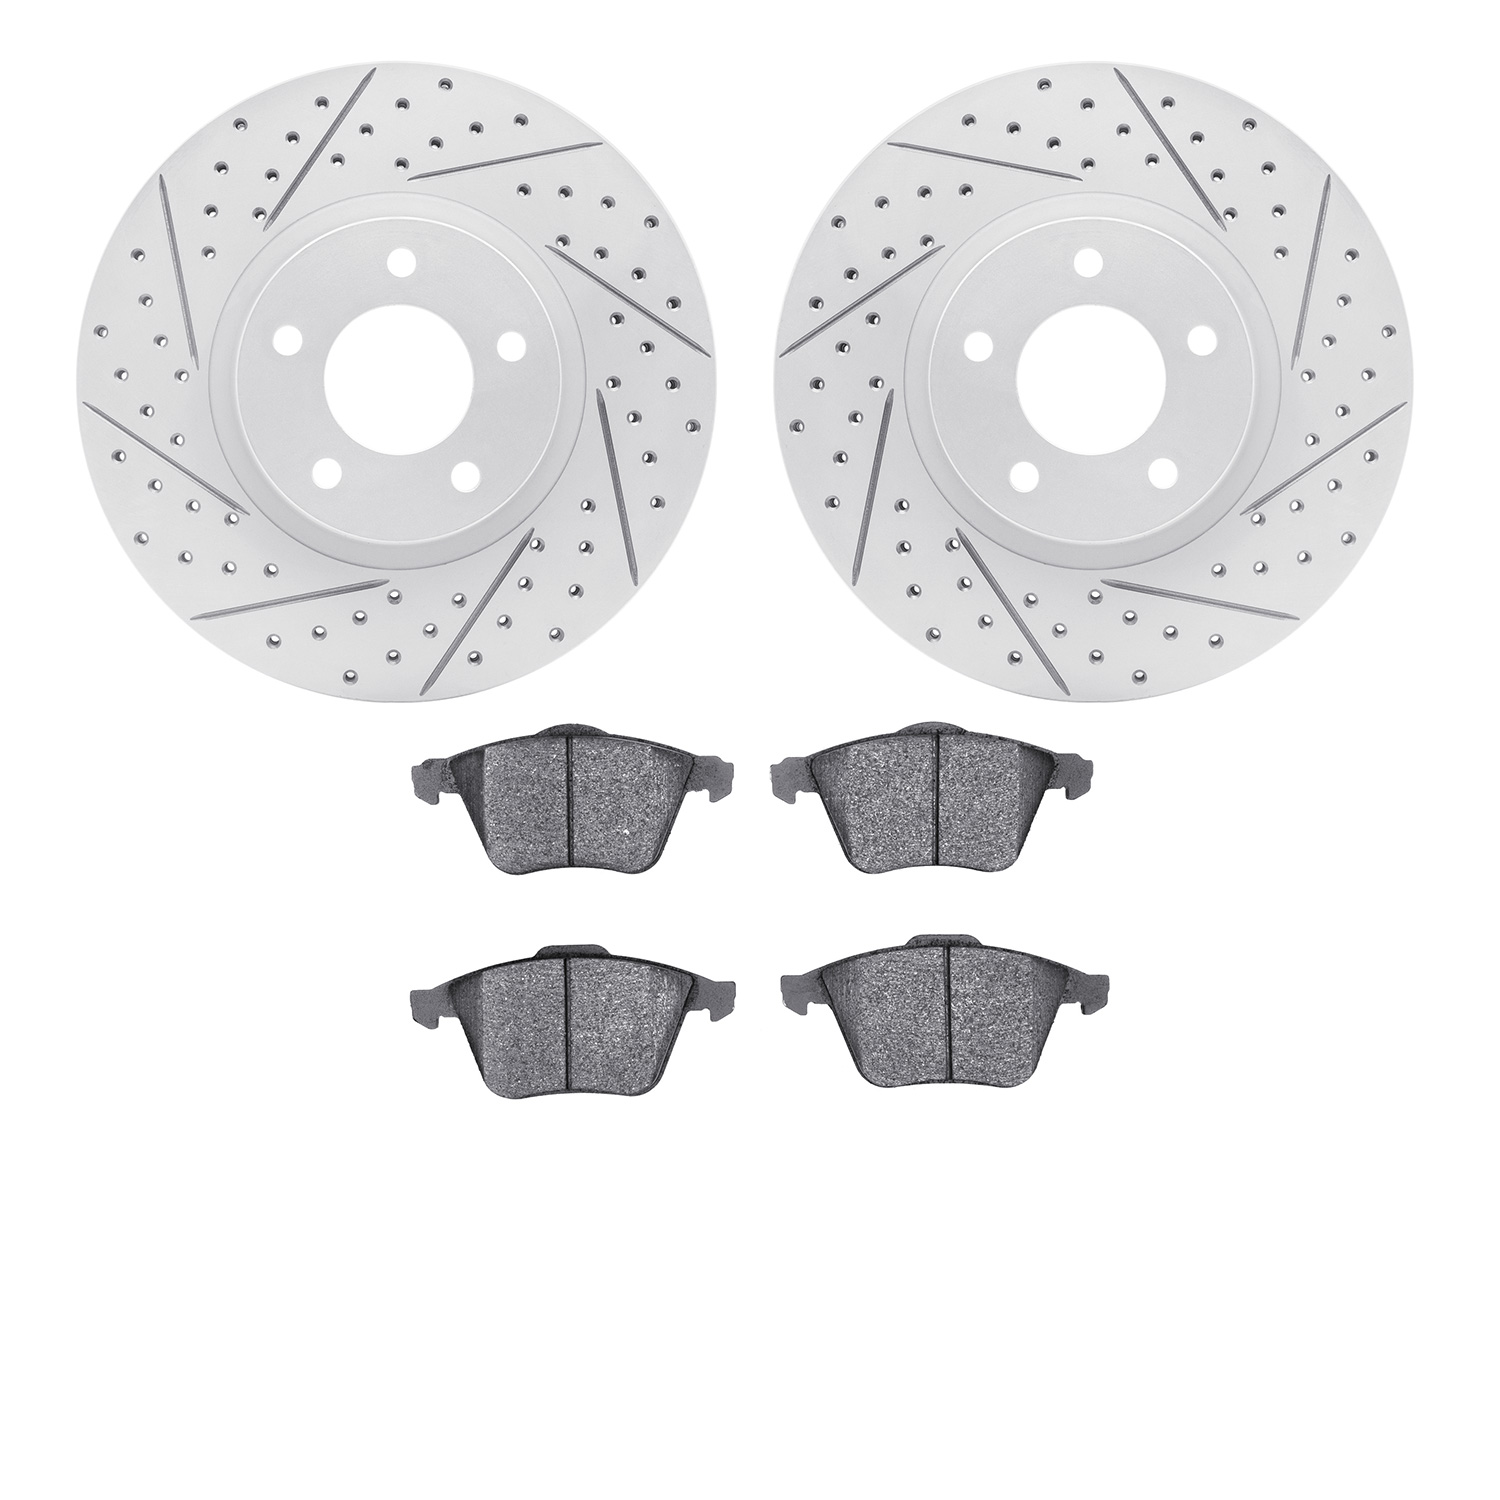 2502-80025 Geoperformance Drilled/Slotted Rotors w/5000 Advanced Brake Pads Kit, 2007-2013 Ford/Lincoln/Mercury/Mazda, Position: